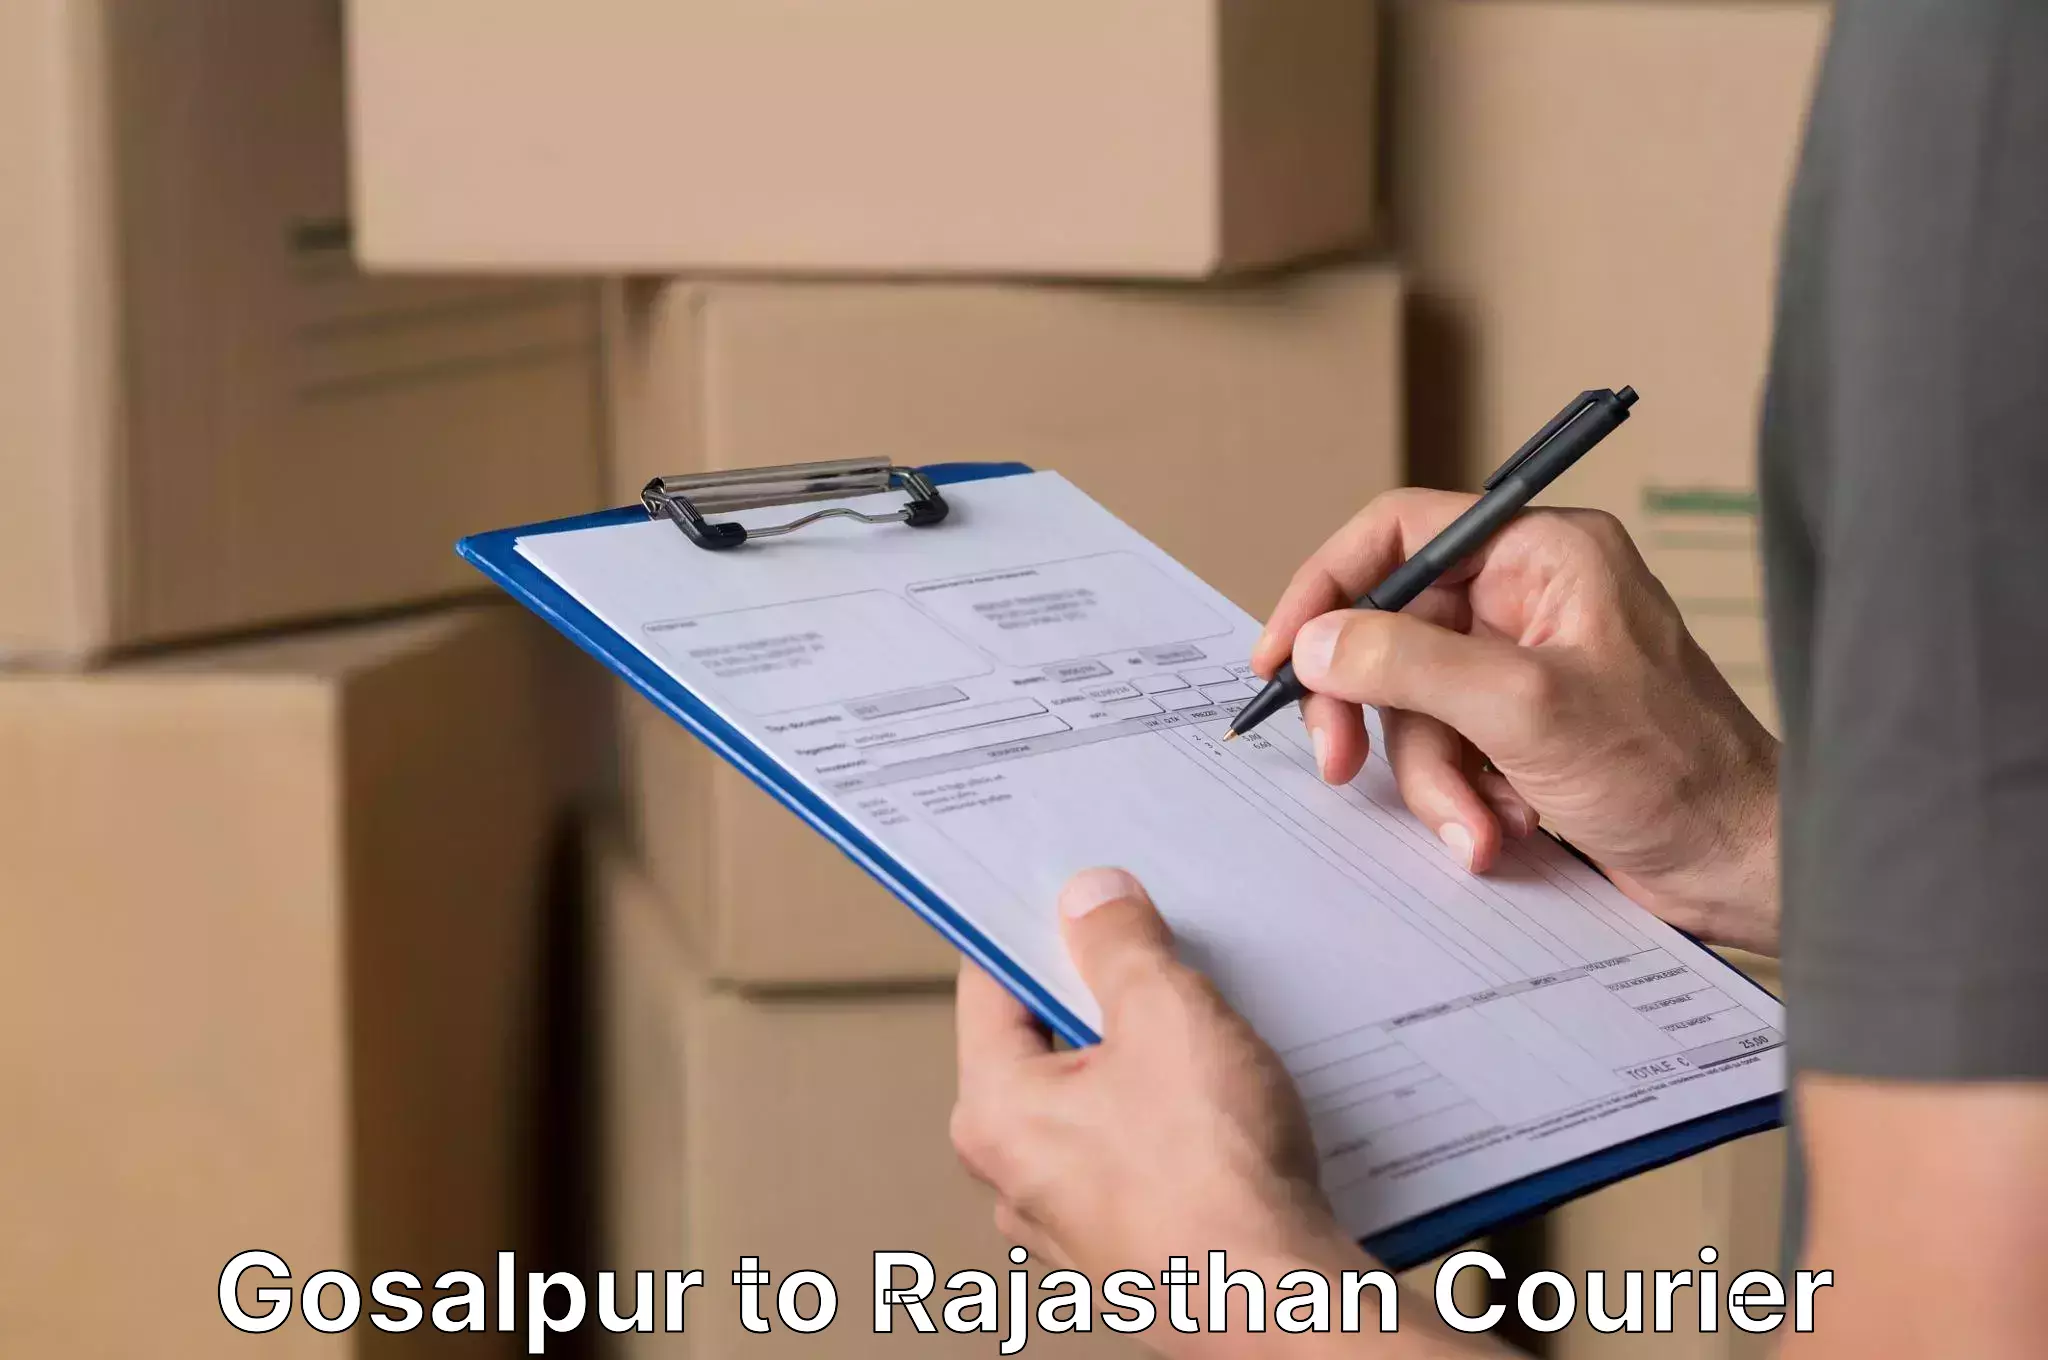 Furniture moving specialists Gosalpur to Rajasthan